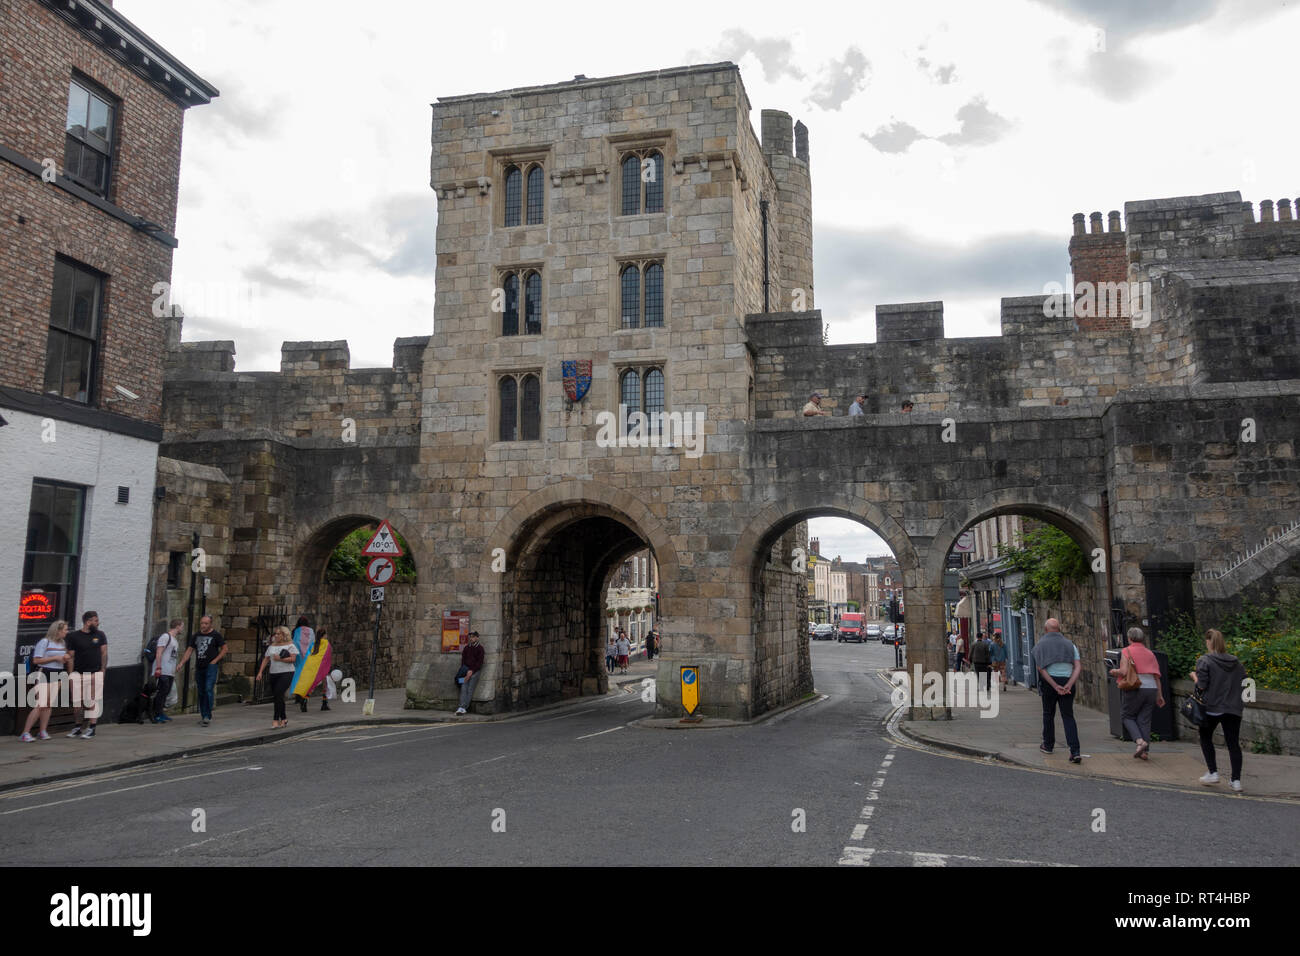 Micklegate Bar, part of the Roman City Walls, viewed from inside the wall, City of York, North Yorkshire, UK. Stock Photo